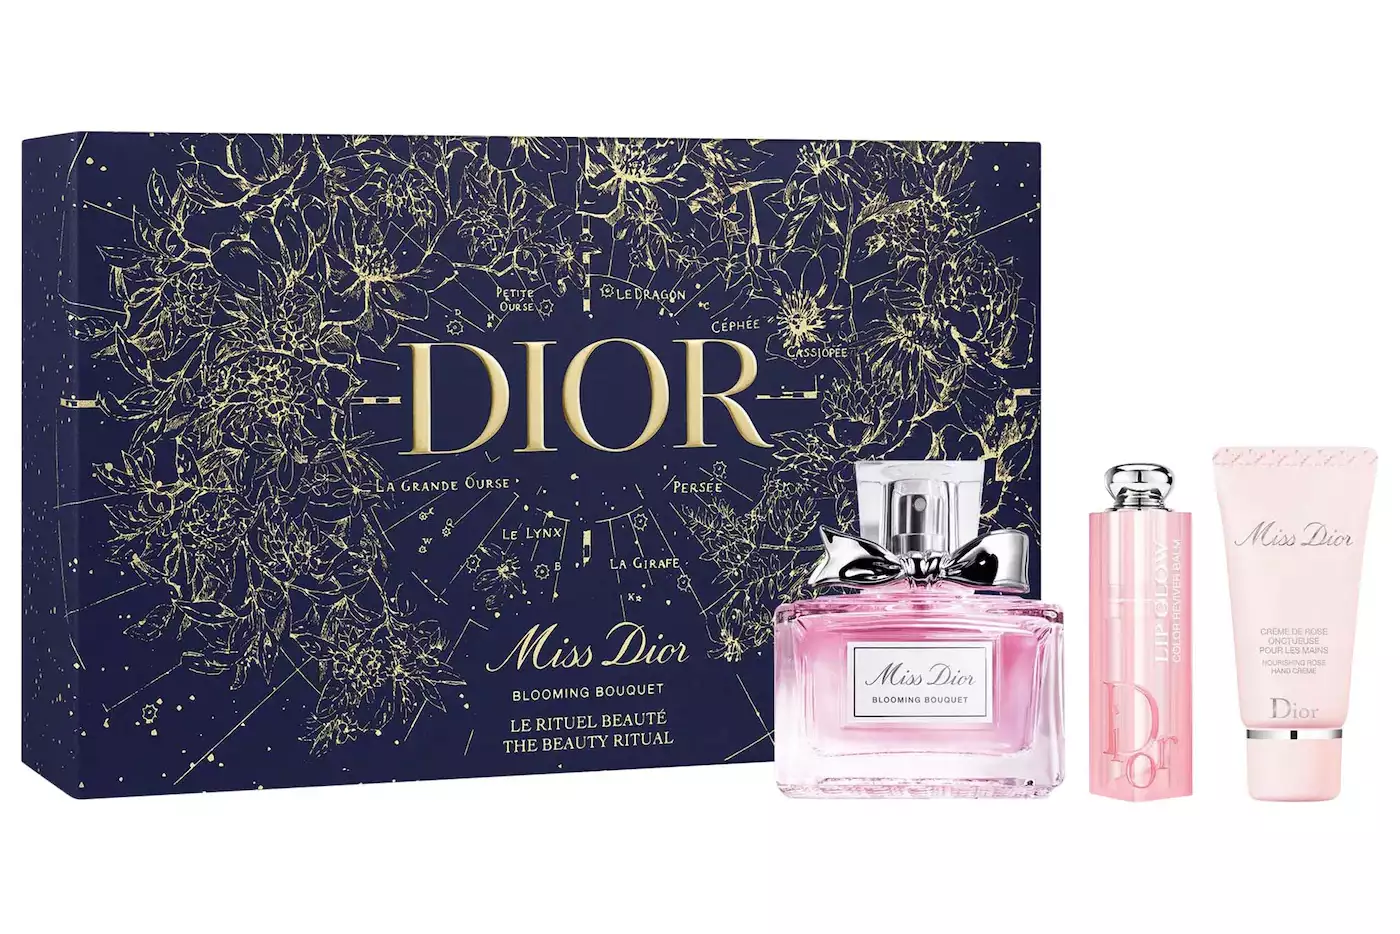 Dior Miss Dior Blooming Bouquet Lifestyle Gift Set